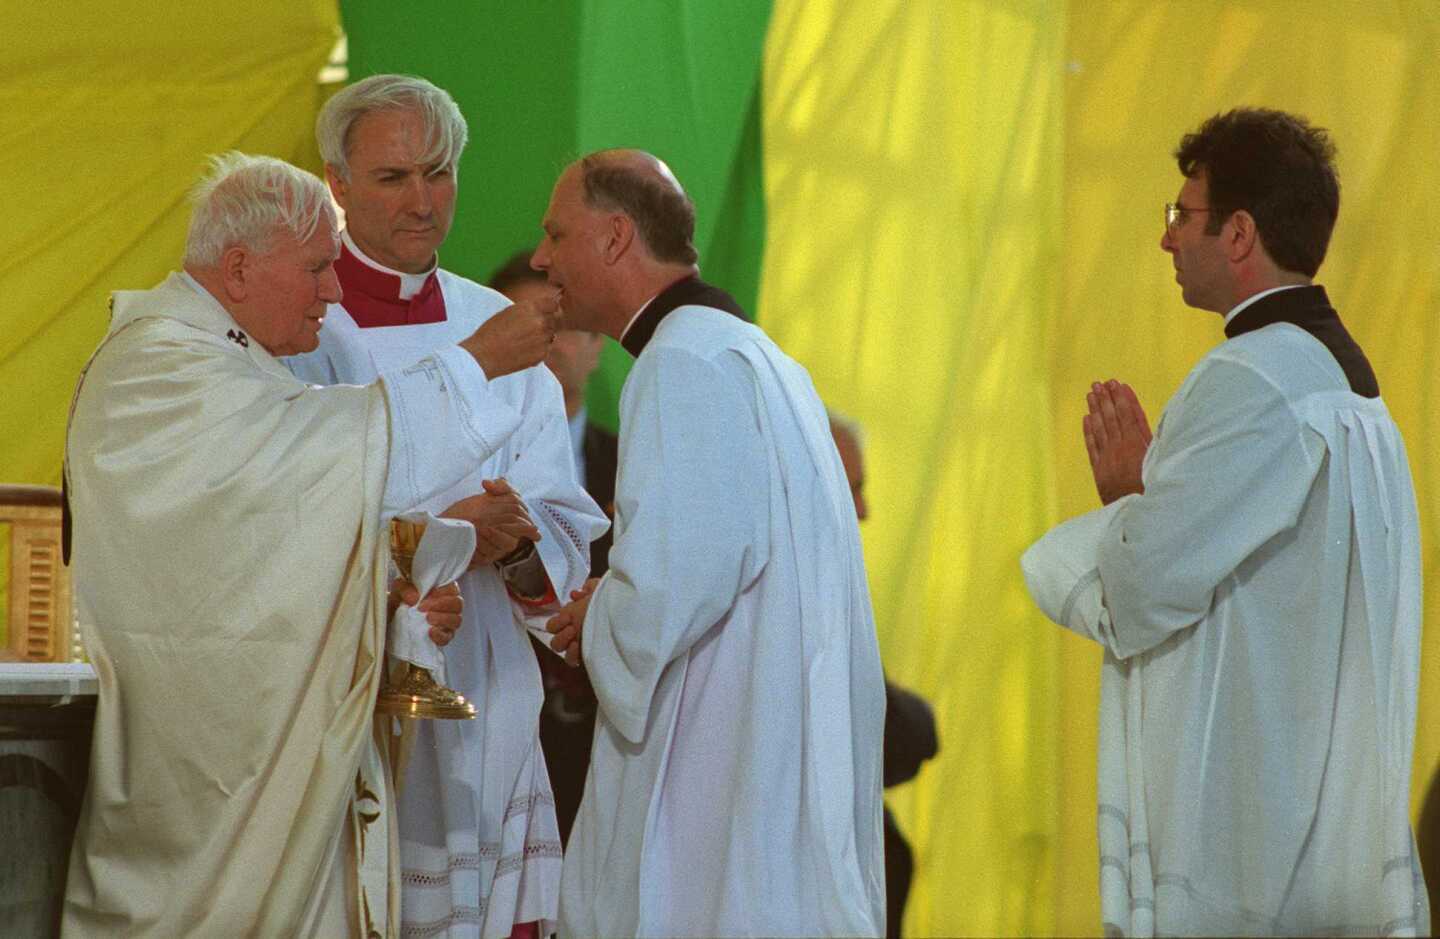 Pope John Paul II presides over a Mass at Aqueduct Racetrack in Queens, N.Y.